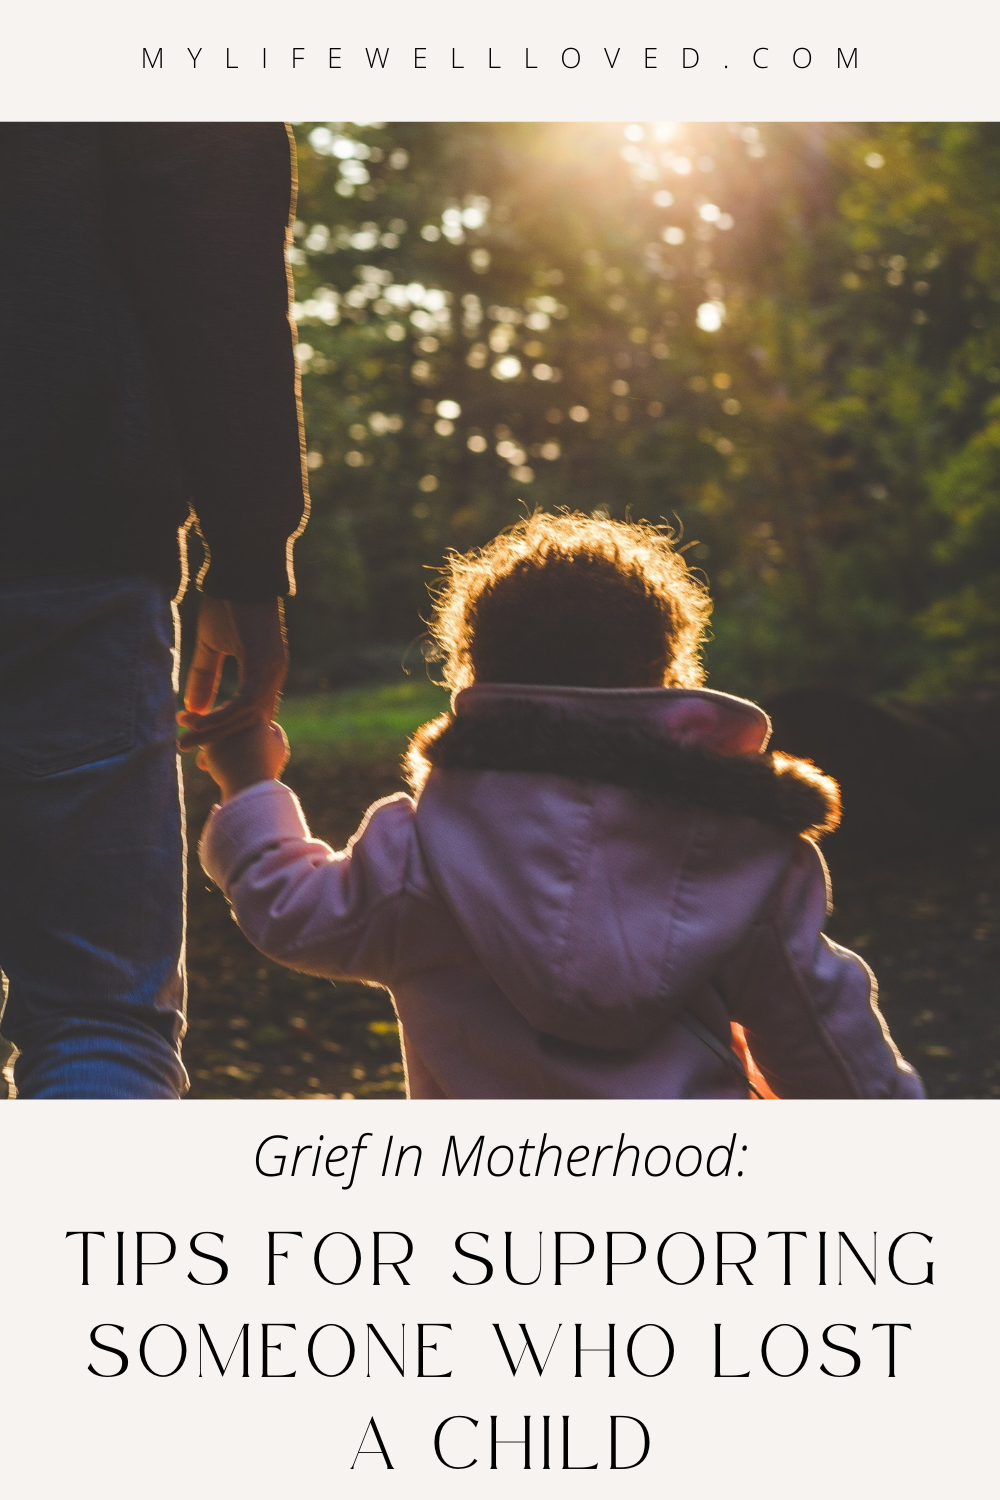 Christian Birmingham podcaster, boy mom, & health coach, Heather Brown from My Life Well Loved, shares tips for navigating grief in motherhood and tips for supporting someone who lost a child.